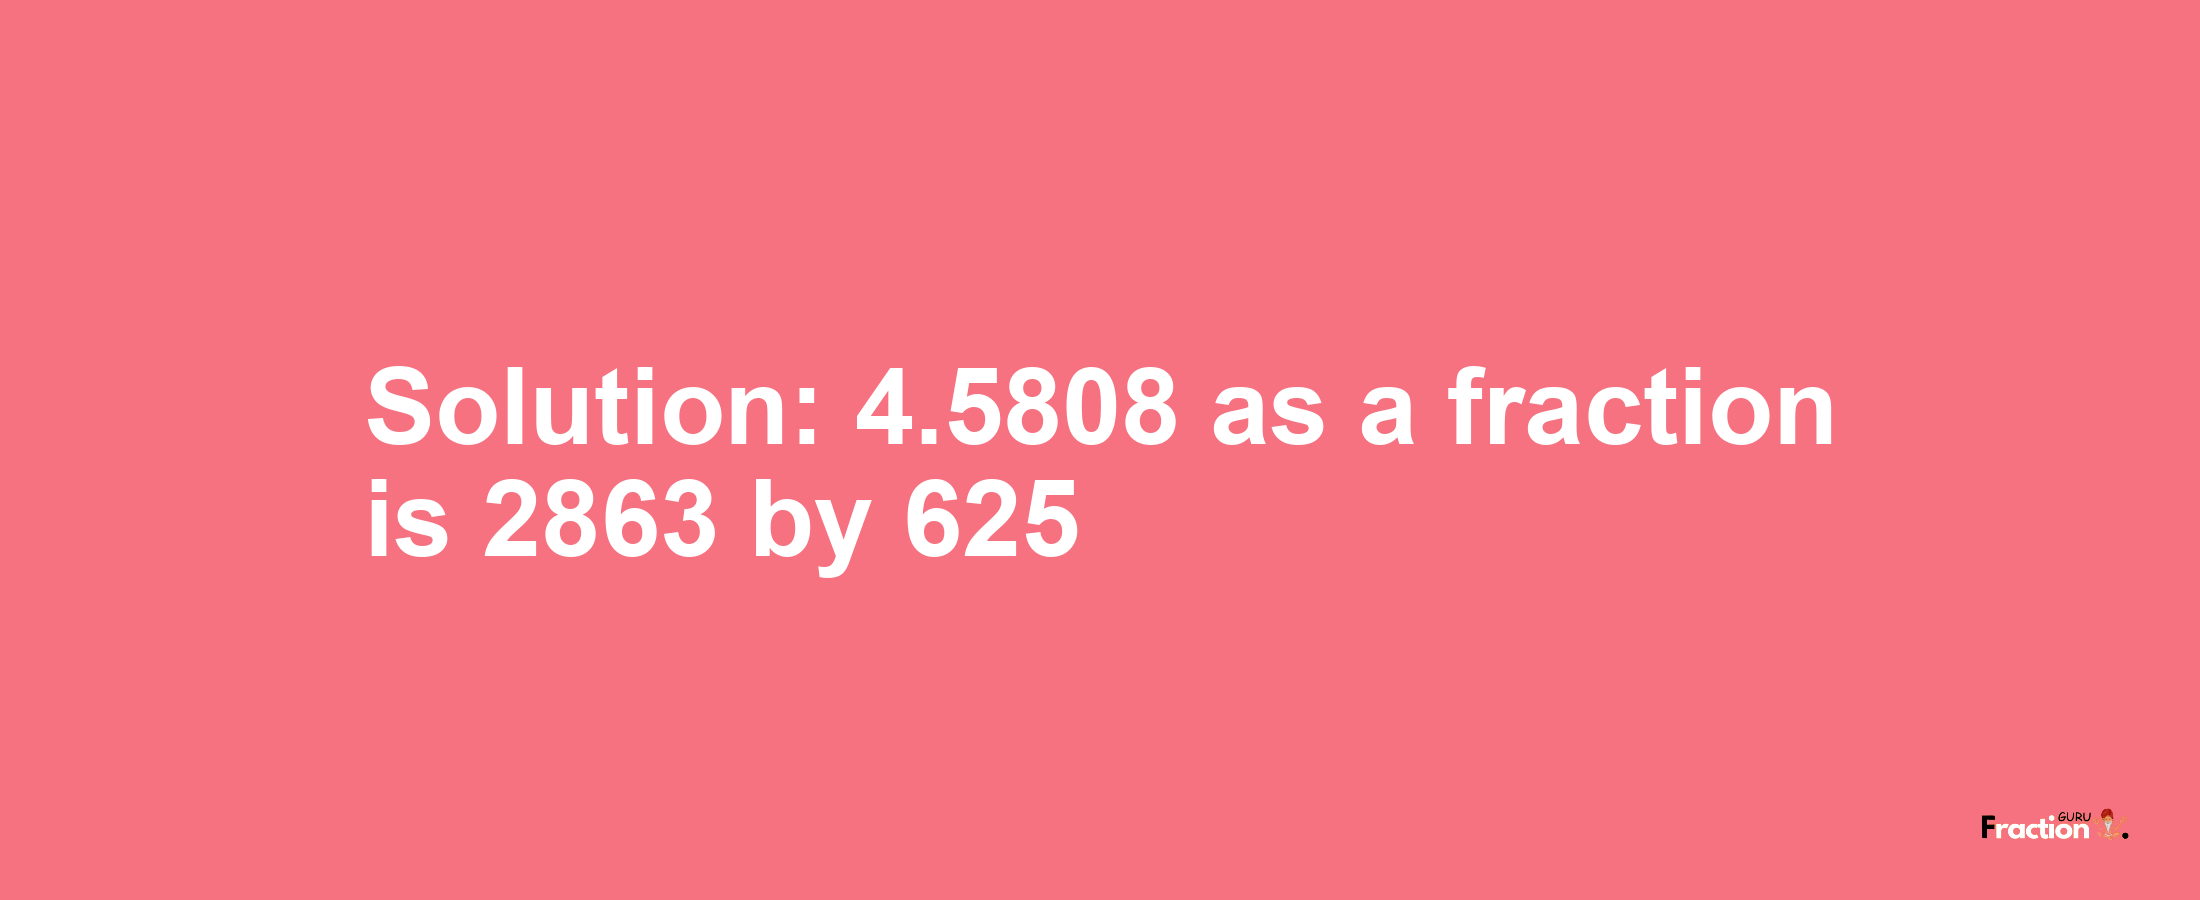 Solution:4.5808 as a fraction is 2863/625